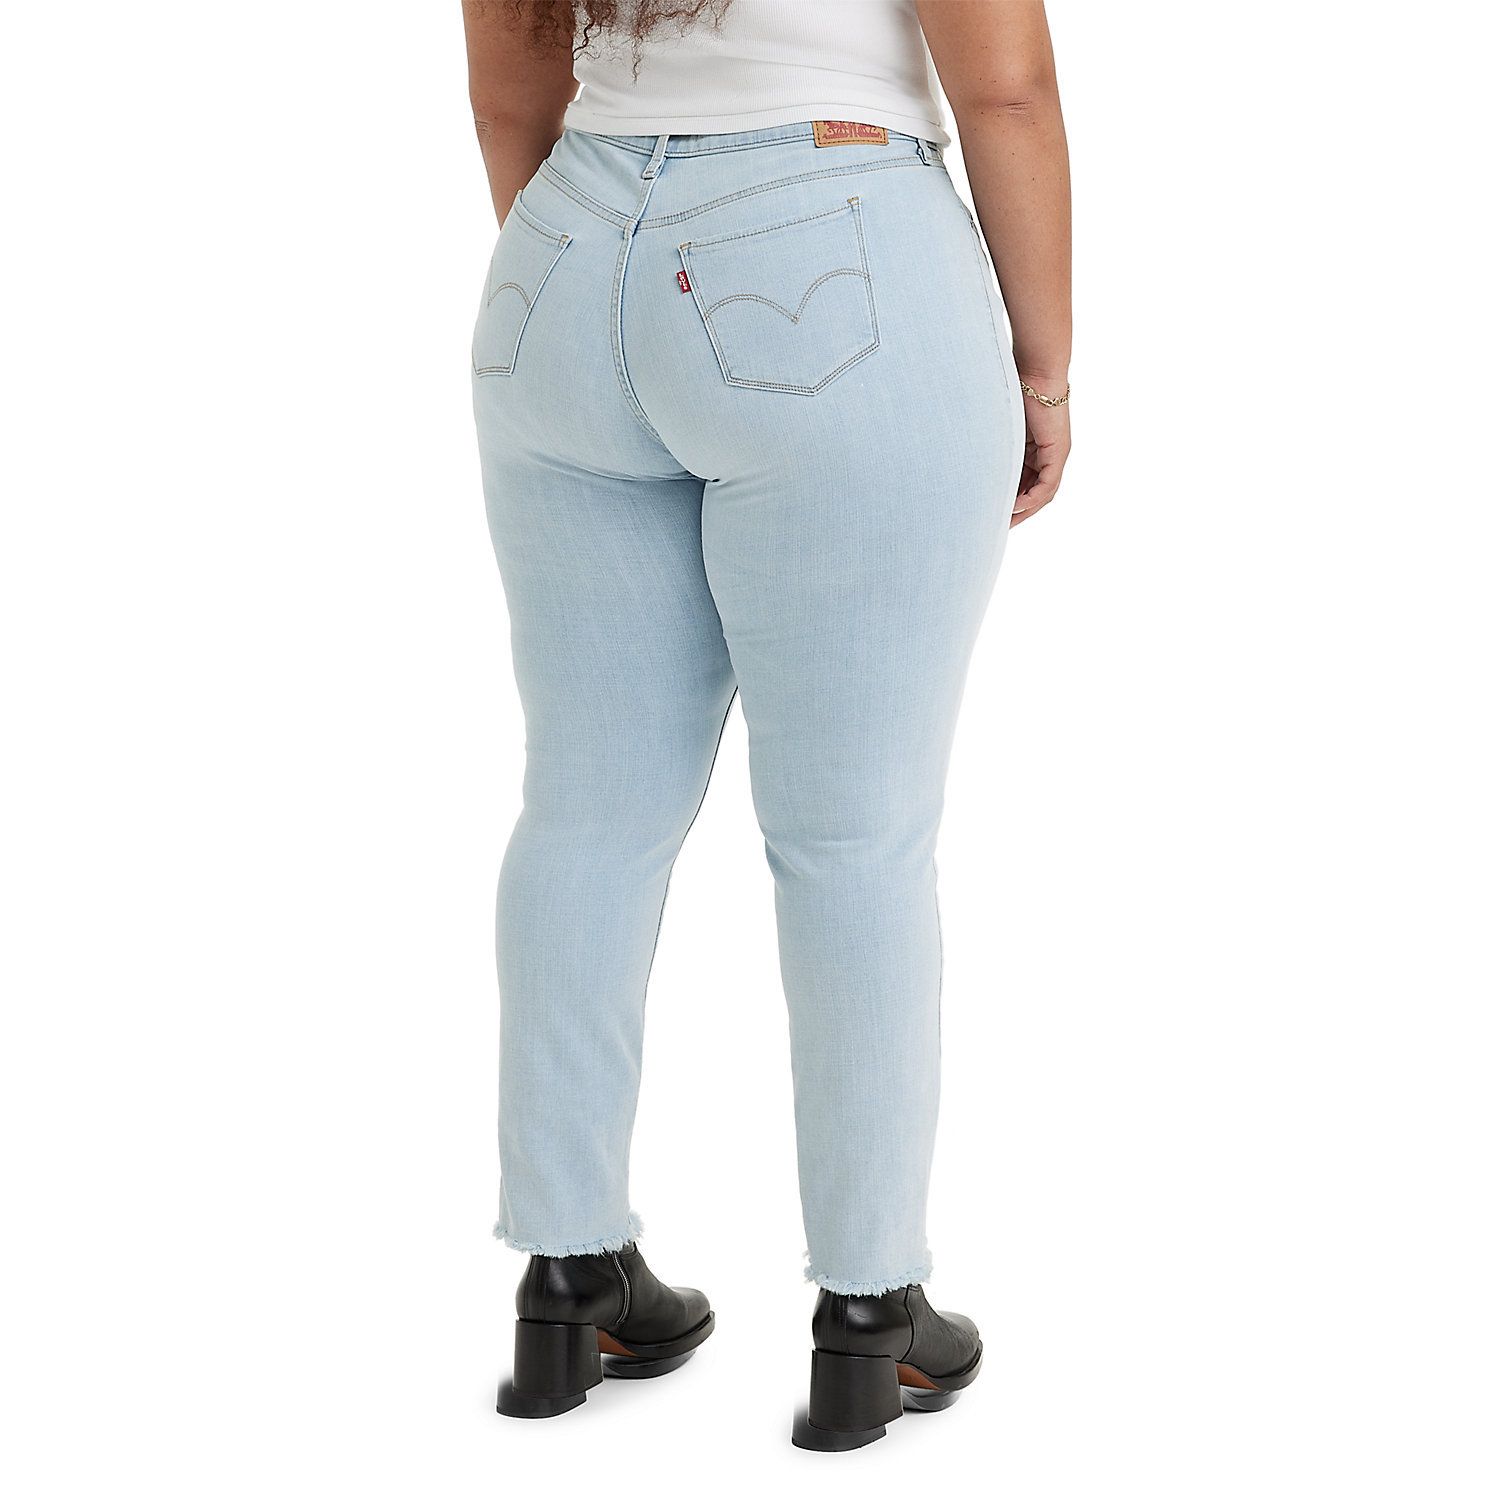  BR71 WOMENS PLUS SIZE BLACK Denim JEANS Stretch Skinny Ripped  Distressed Pants (20-PLUS) : Clothing, Shoes & Jewelry